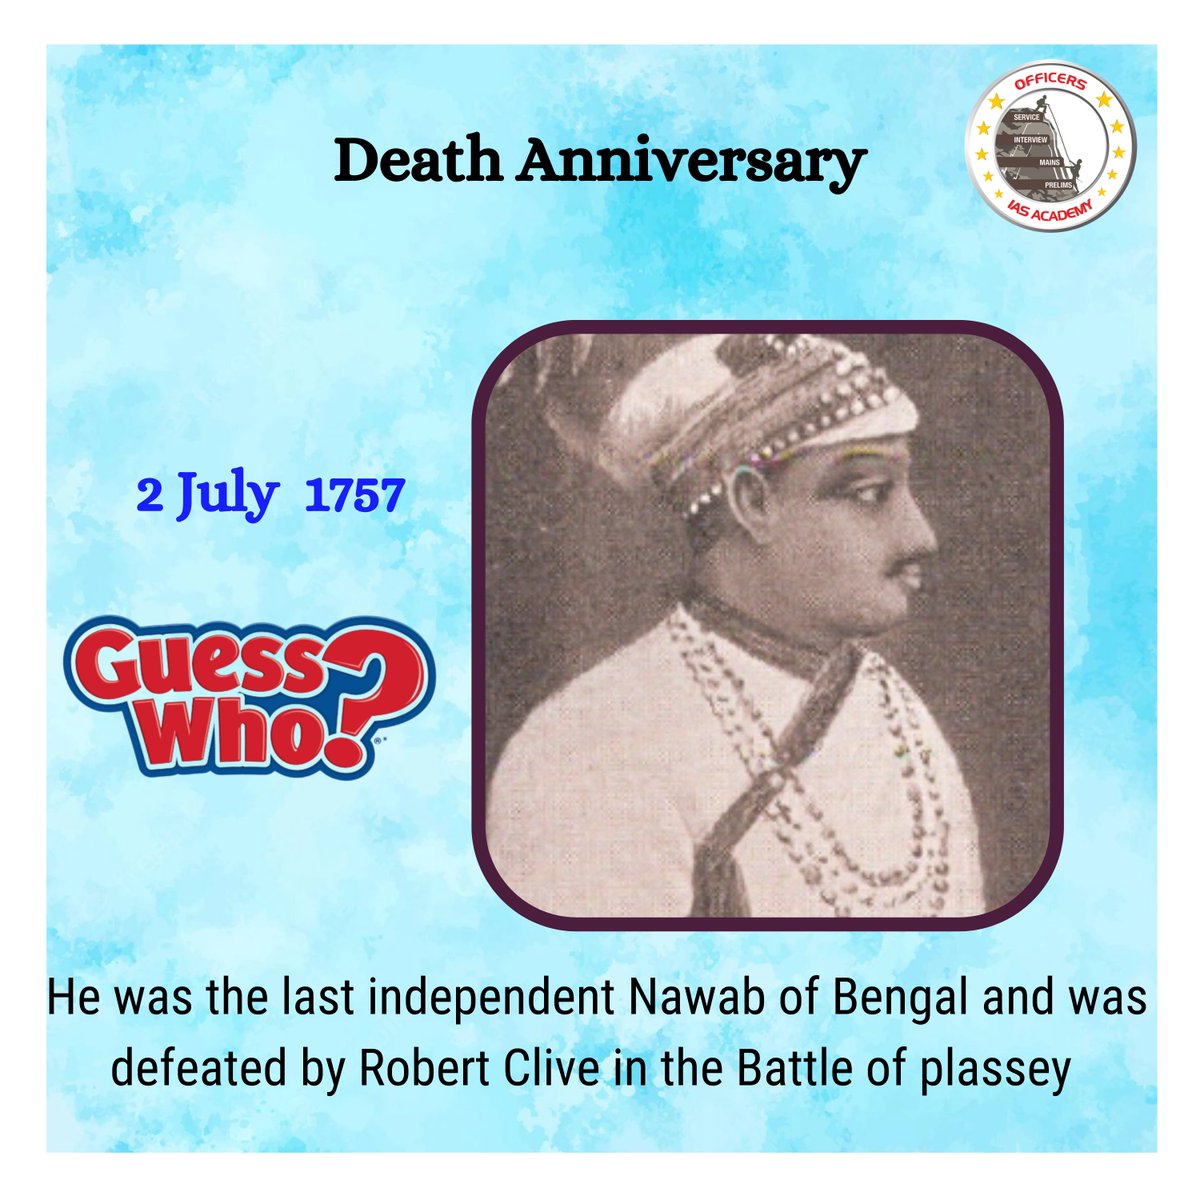 Important personalities to be remembered! #author #deathanniversary #generalknowlege #UPSC #civilservice